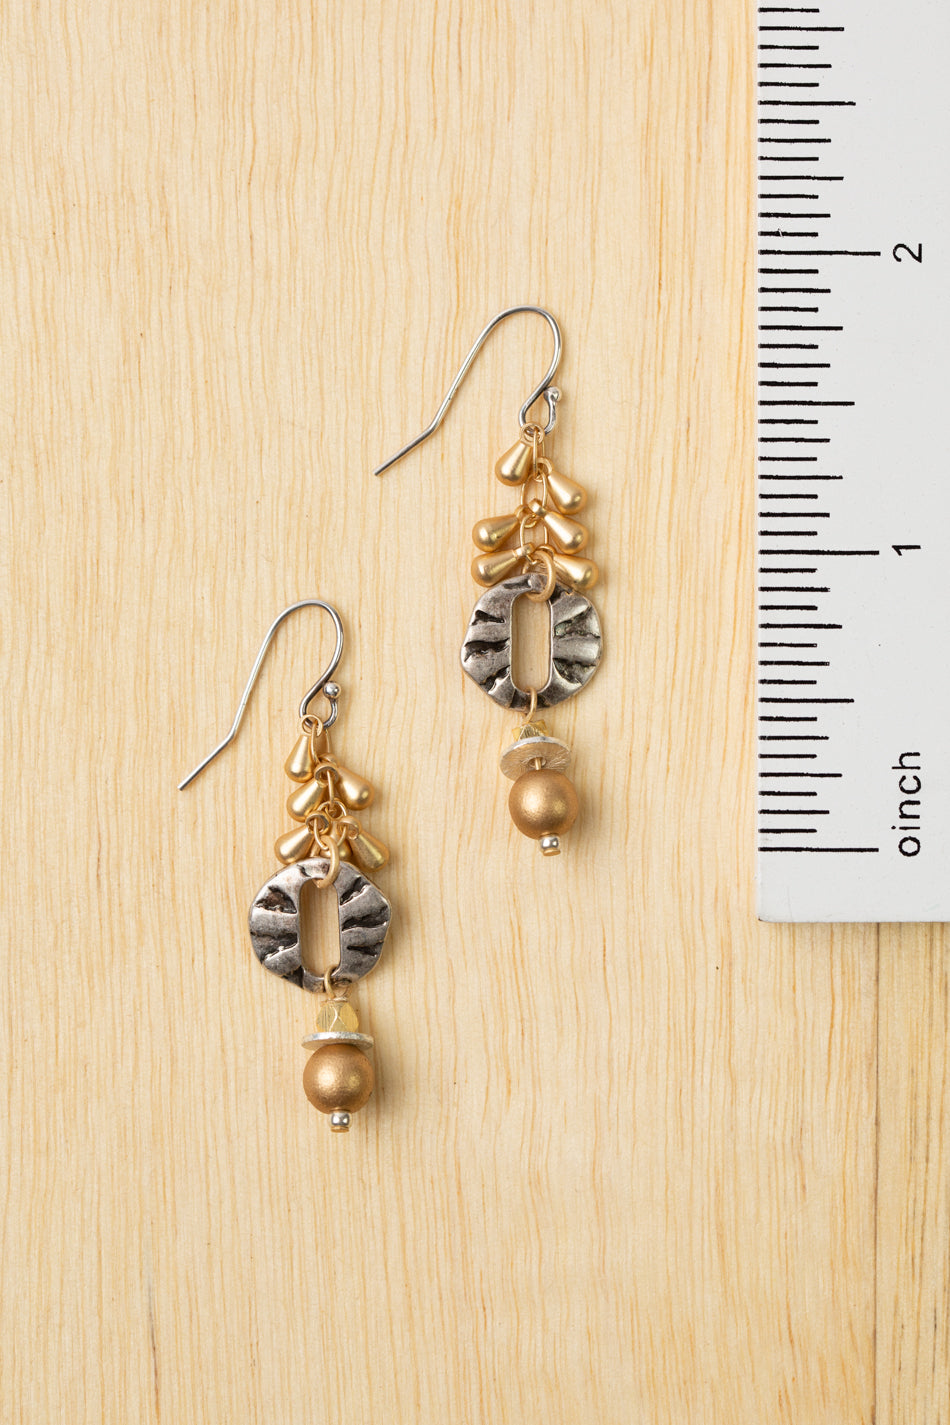 Silver & Gold Mixed Metal Earrings (limited)